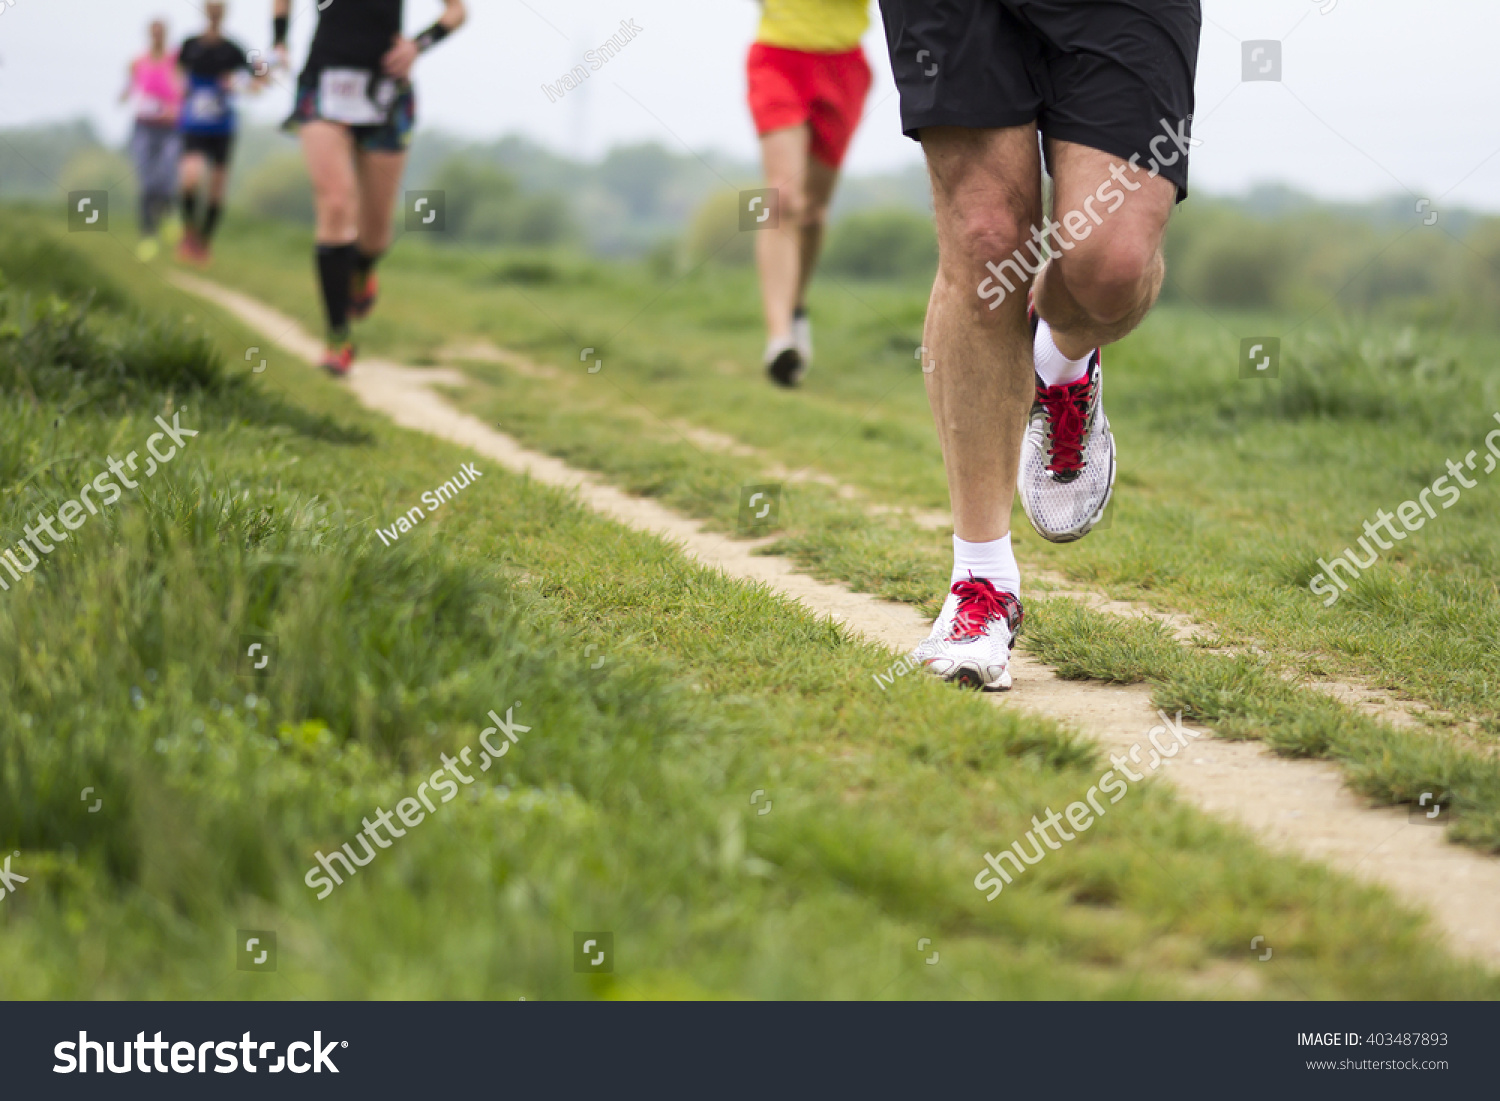 Outdoor marathon cross-country running fitness and healthy lifestyle #403487893